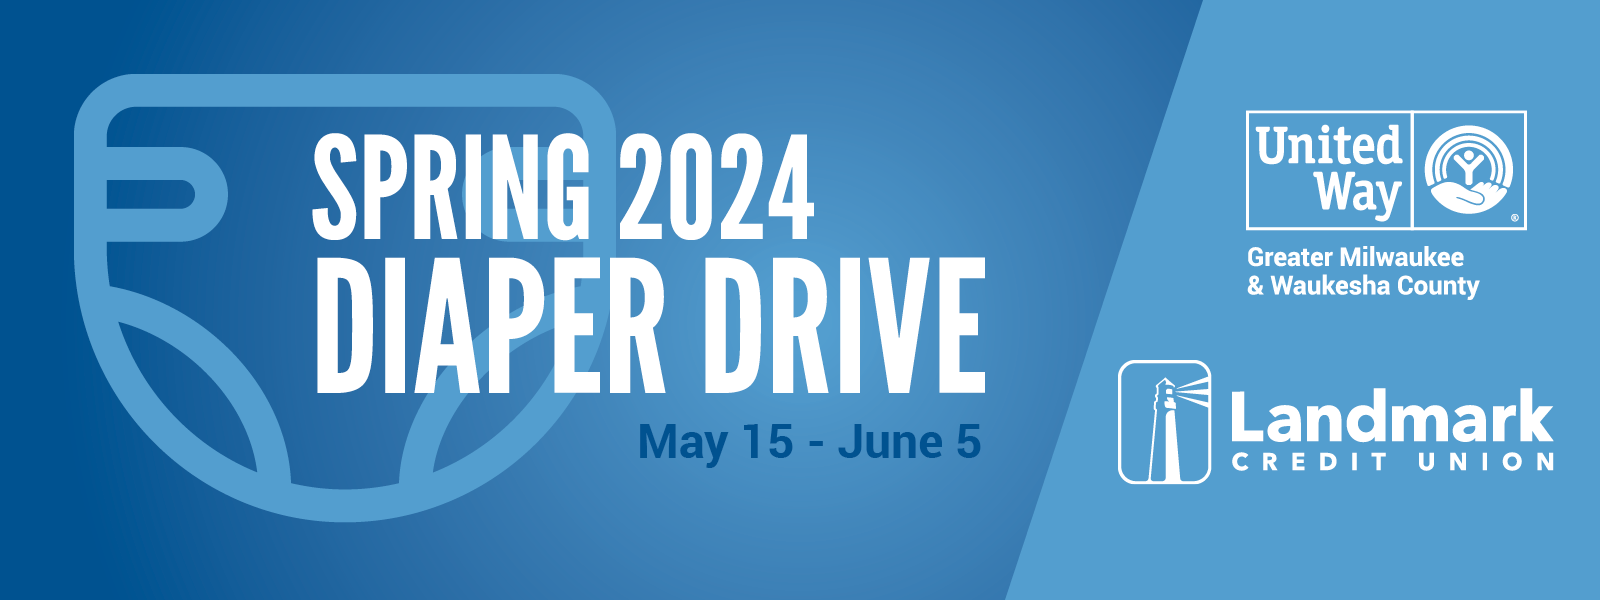 Image with words Spring 2024 Diaper Bank and United Way and Landmark Credit Union logos